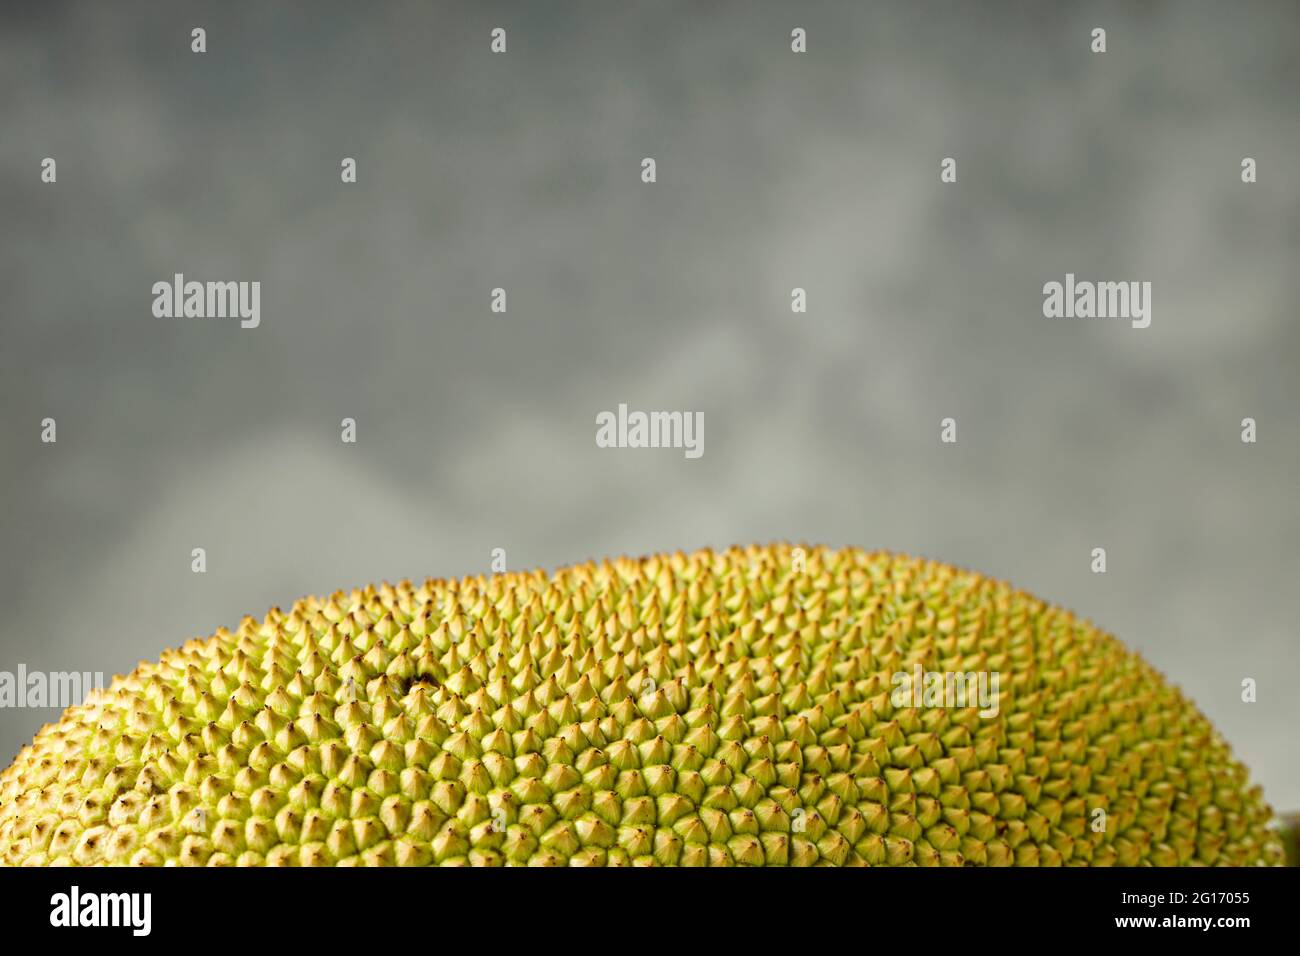 Jackfruit arranged beautifully in a grey and white textured background, isolated. Stock Photo